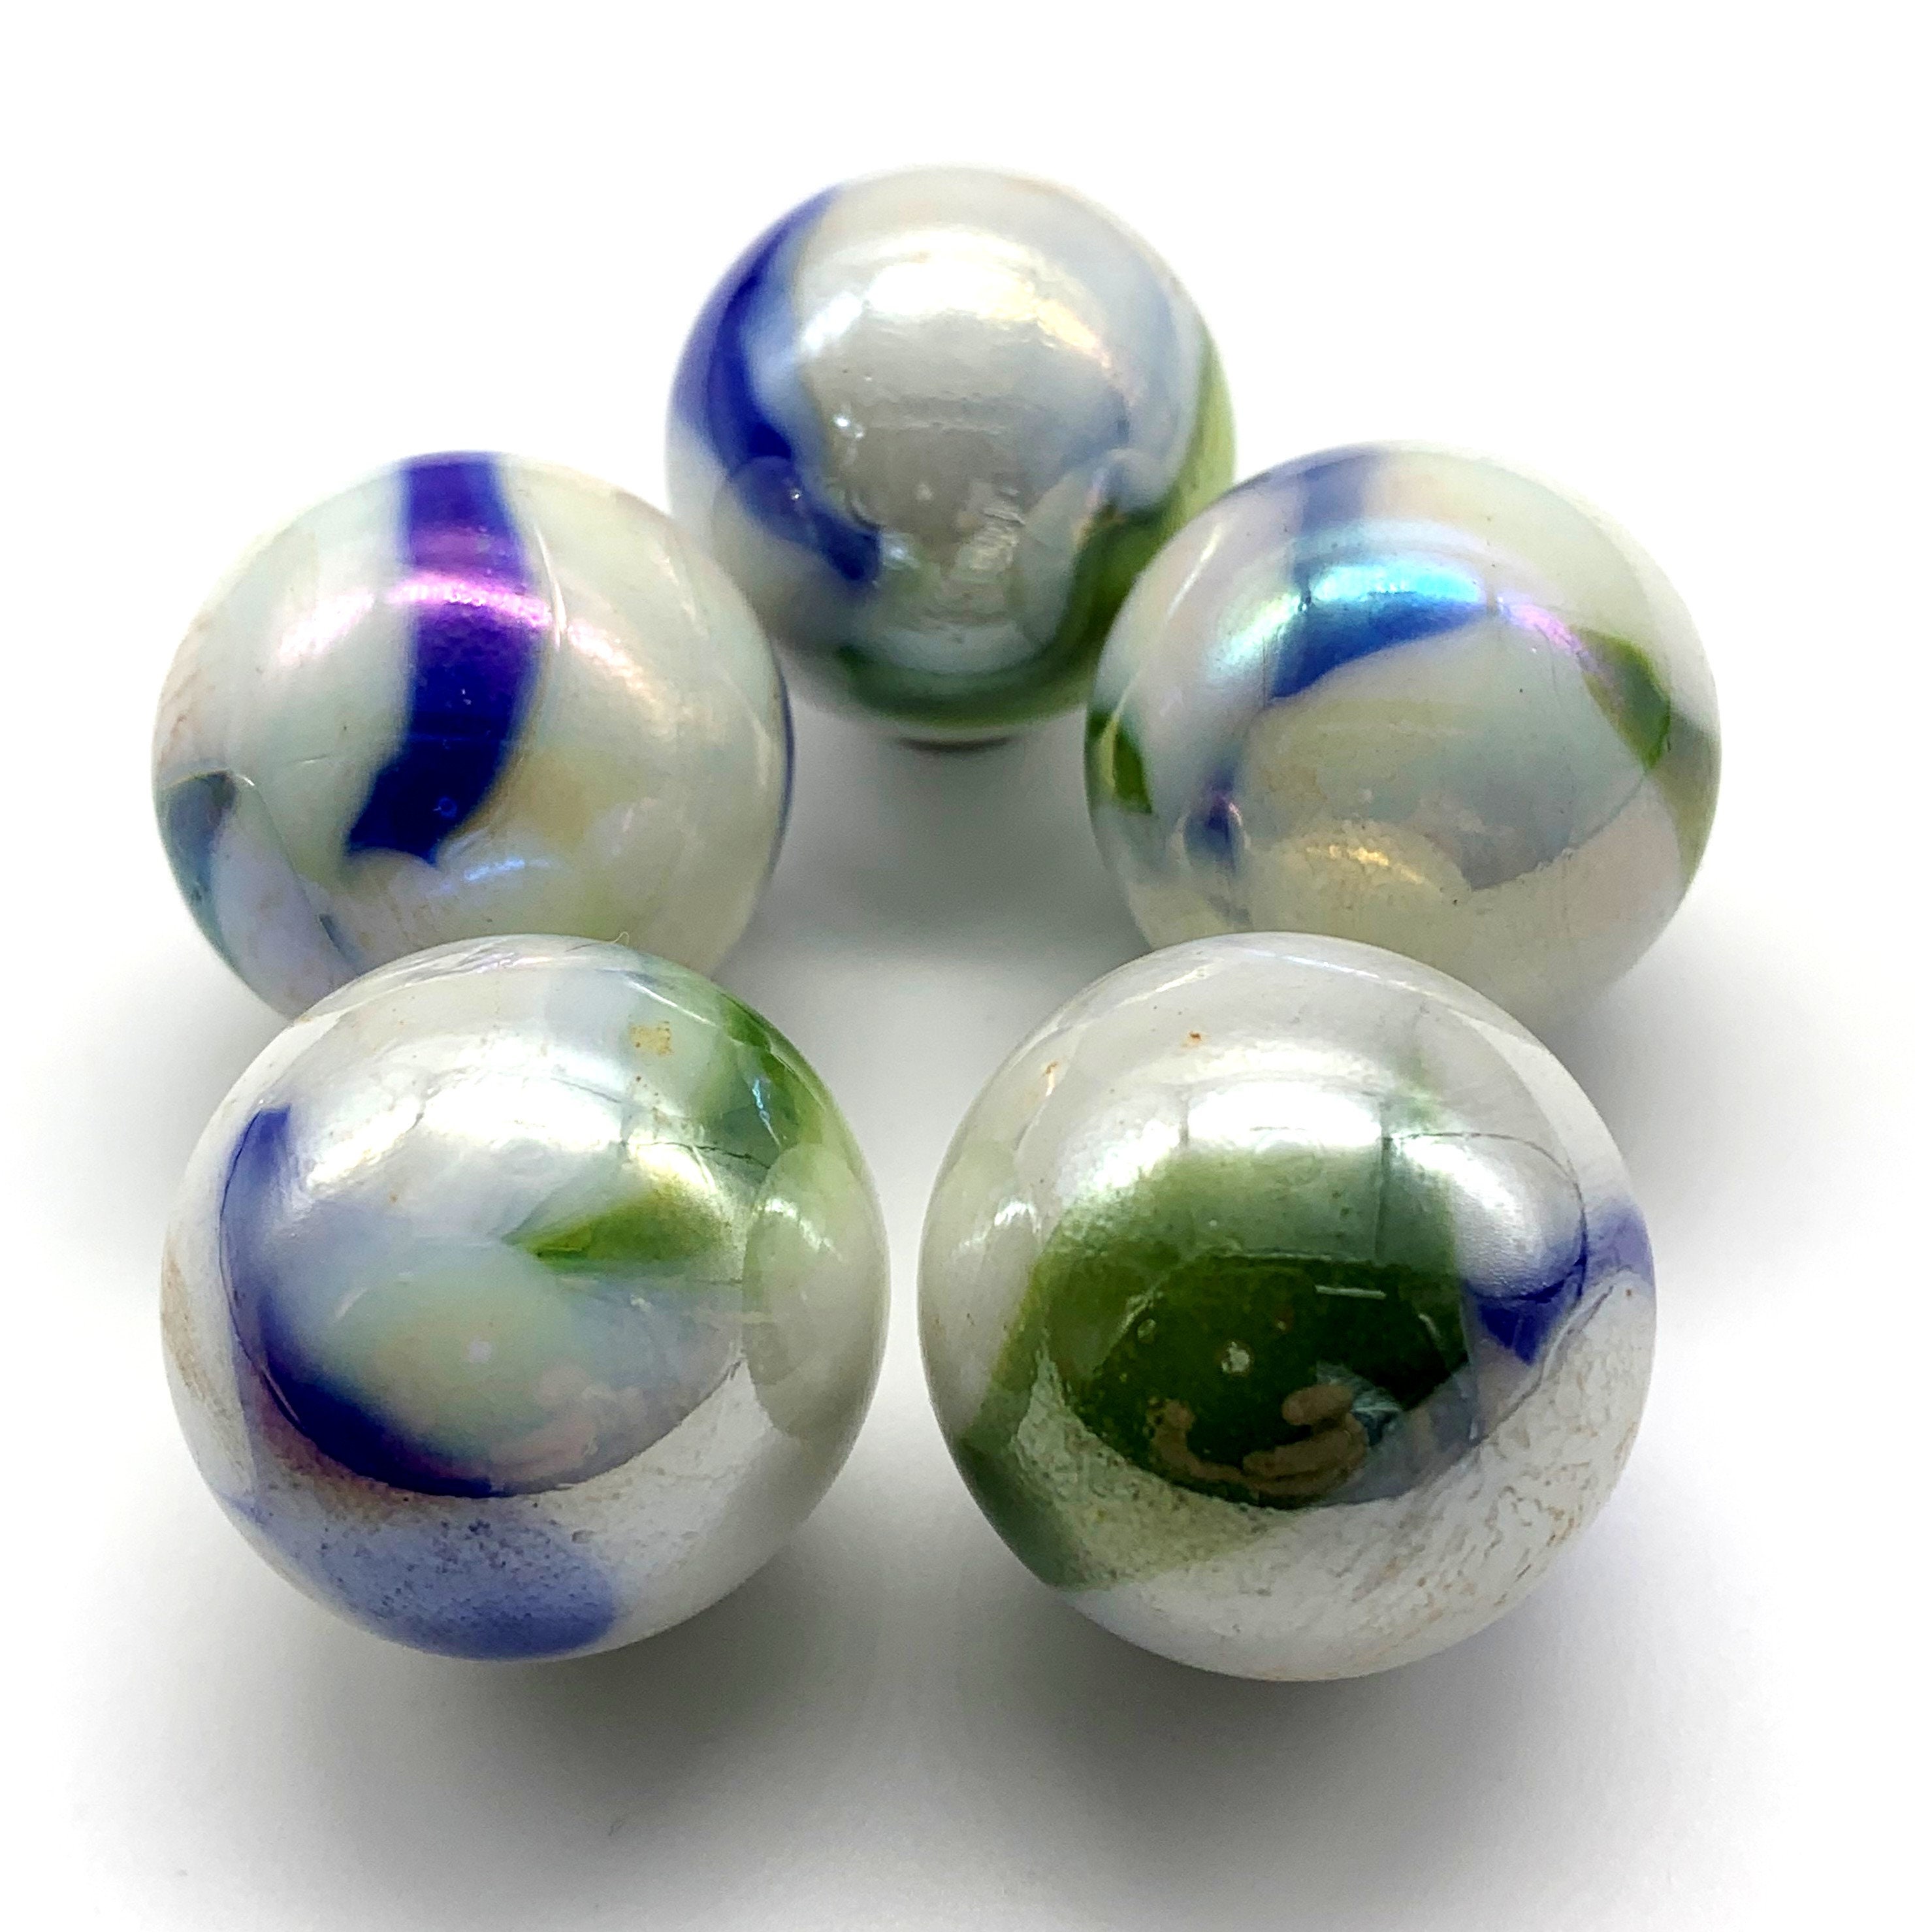 25mm Comet 1 inch Glass Marble Shooters Pack of 5 Etsy